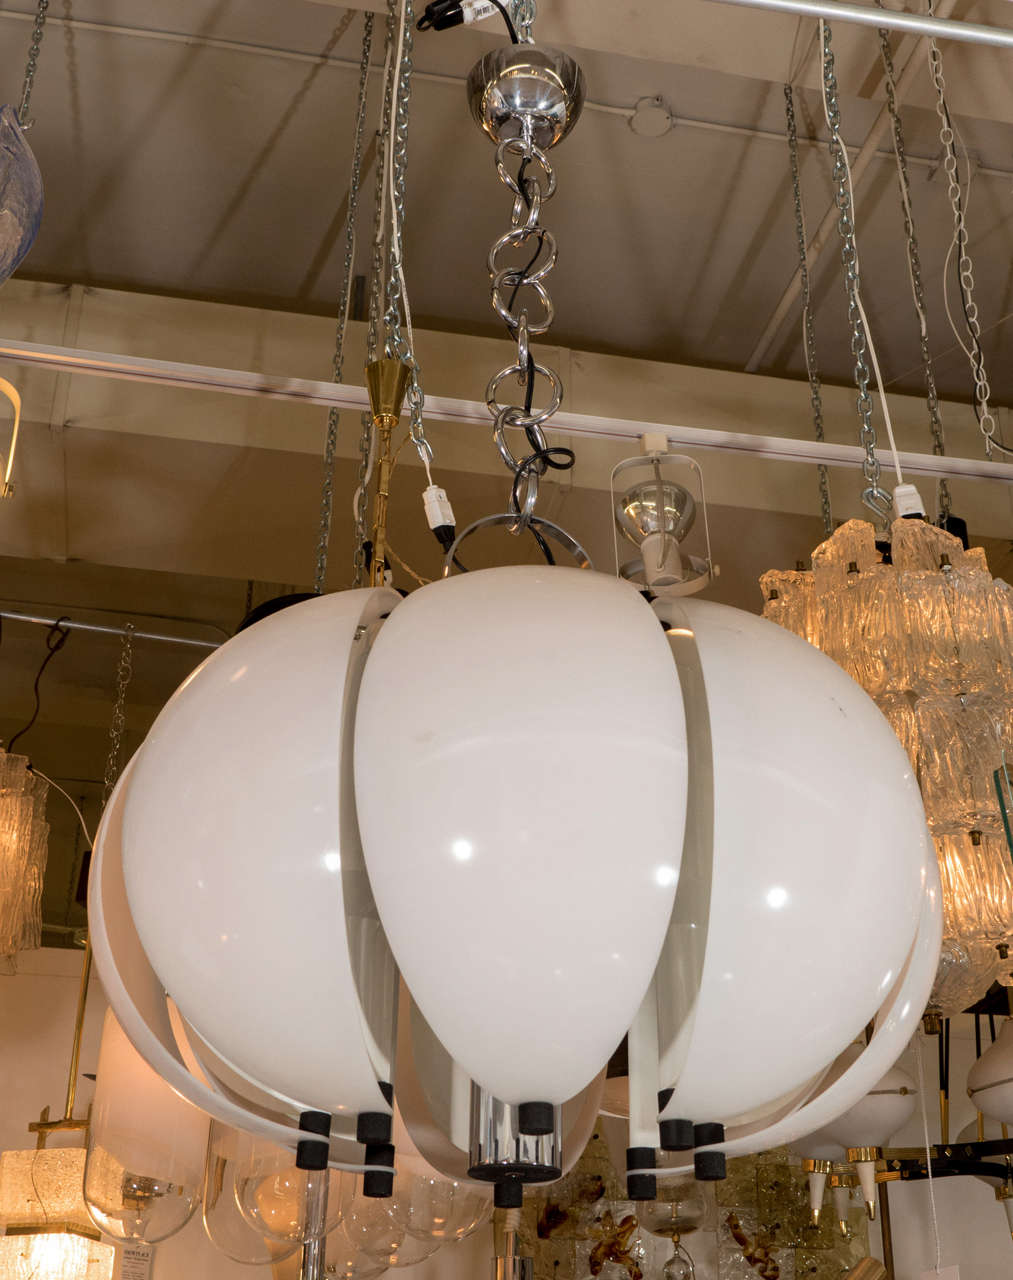 A very cool Italian, 1970s Mod design pendant light in chromed iron, white enamel metal and Perspex (Lucite). The body, chain and ceiling canopy are all chromed iron. Eight wedge shapes house a single light and are suspended away from the central